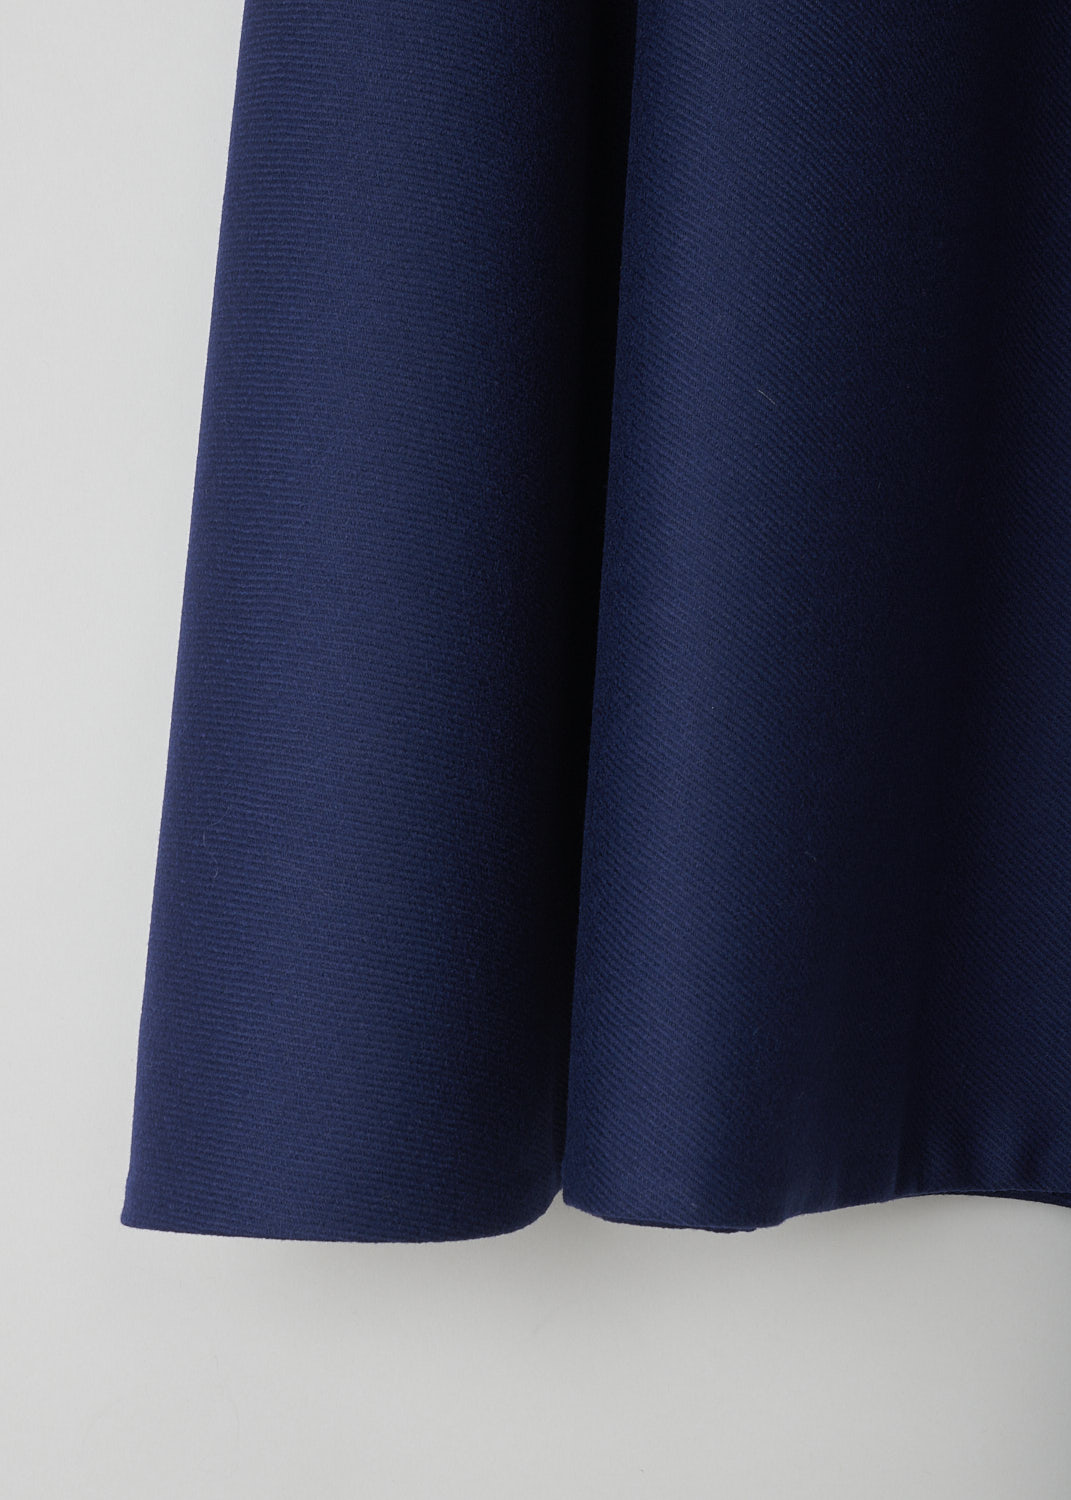 MARNI, NAVY BLUE WOOL MIDI SKIRT, GOMA0300U0_TW902_00B81, Blue, Detail, This navy blue wool midi skirt has an A-line silhouette with a straight hemline. The skirt has a concealed centre zip in the back. 
